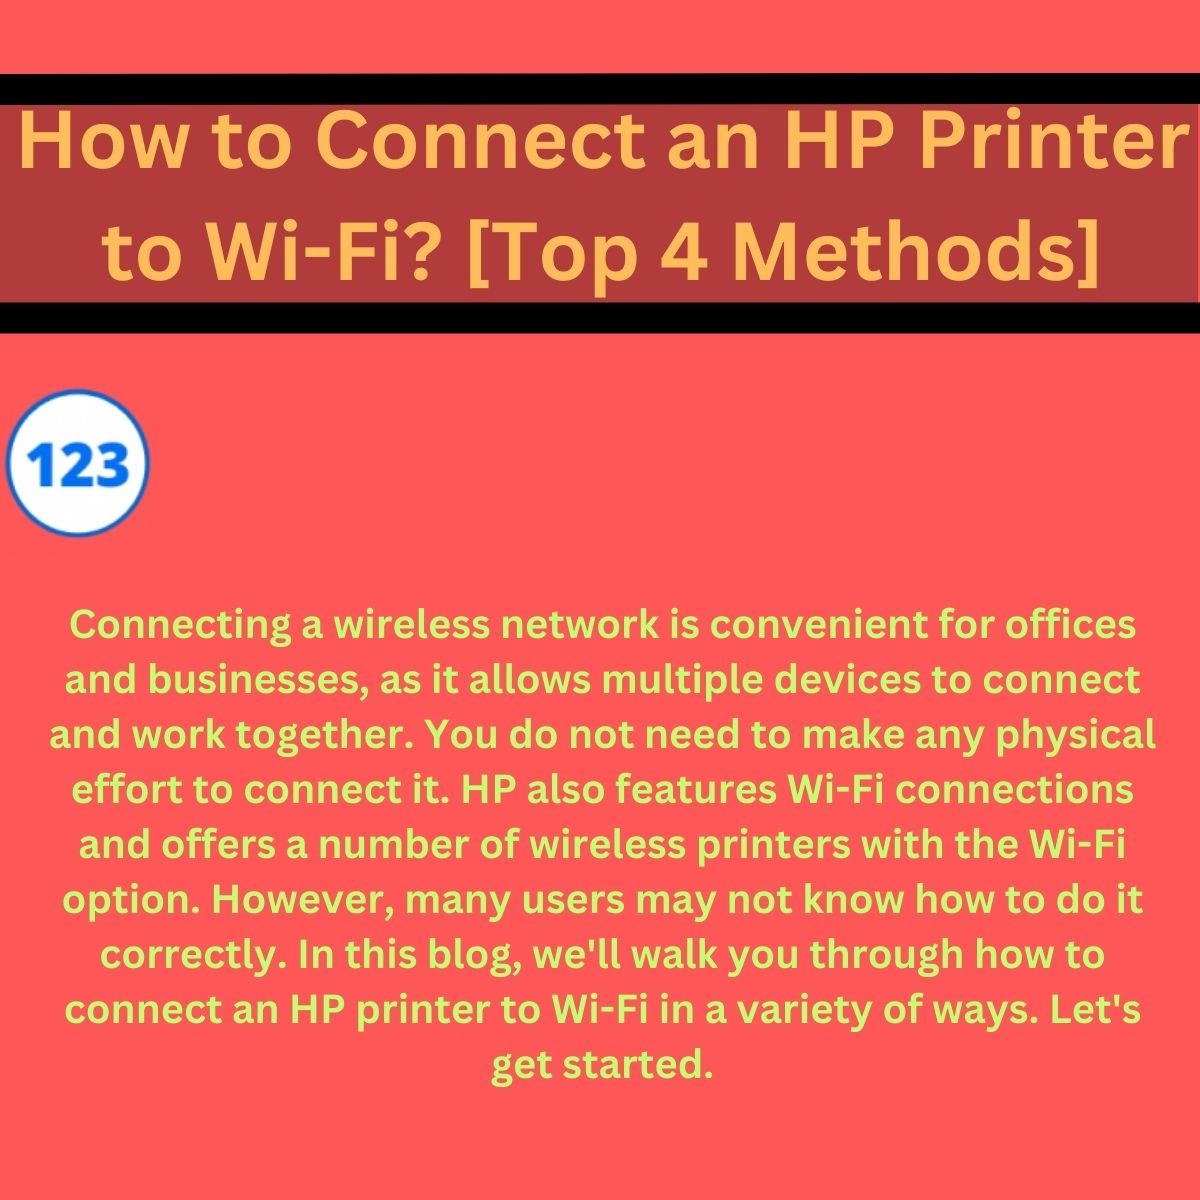 how-to-connect-an-hp-printer-to-wi-fi-top-4-methods-by-jeanne-on